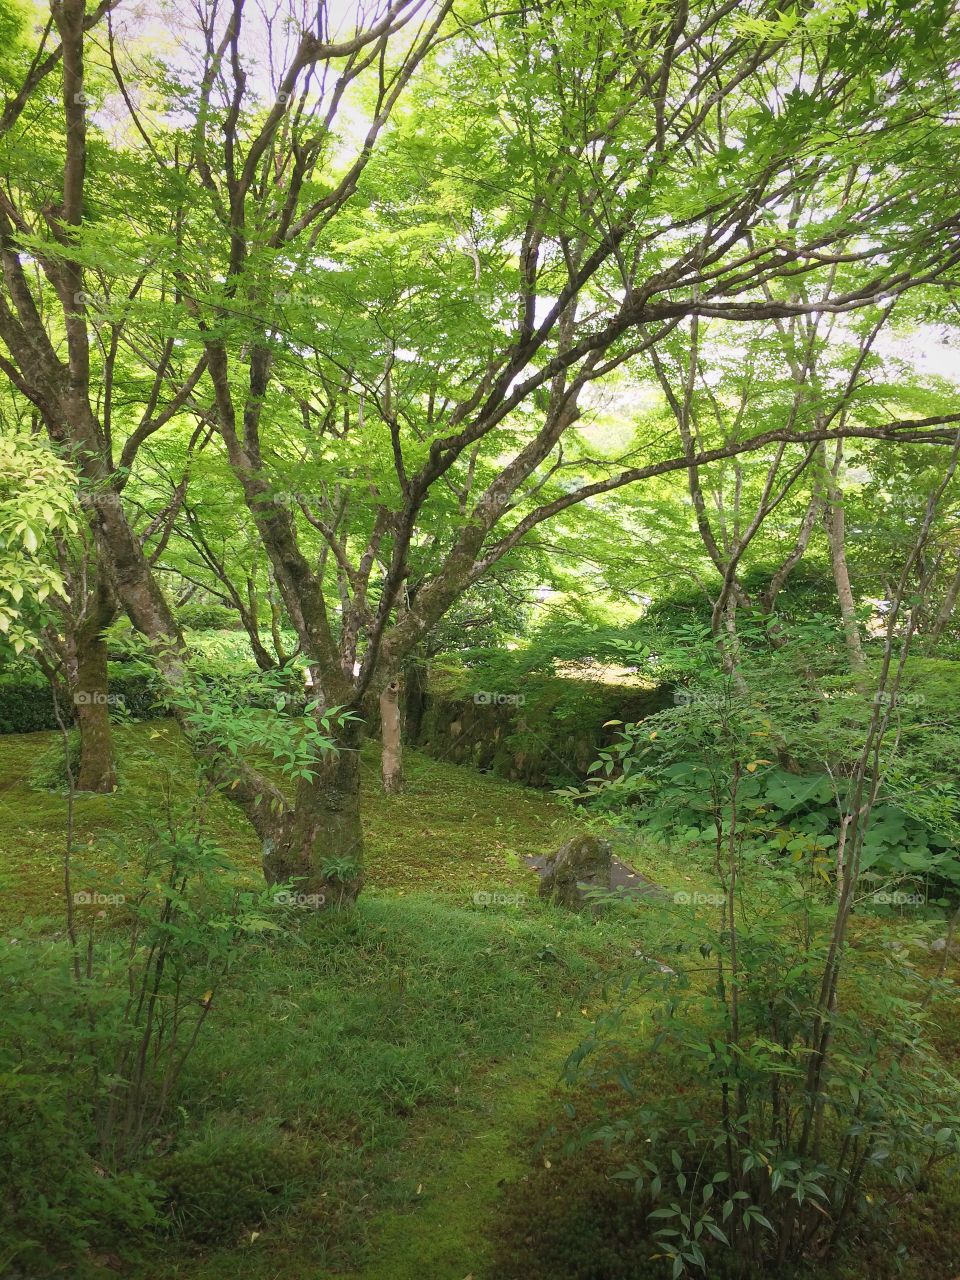 Moss Temple in Kyoto